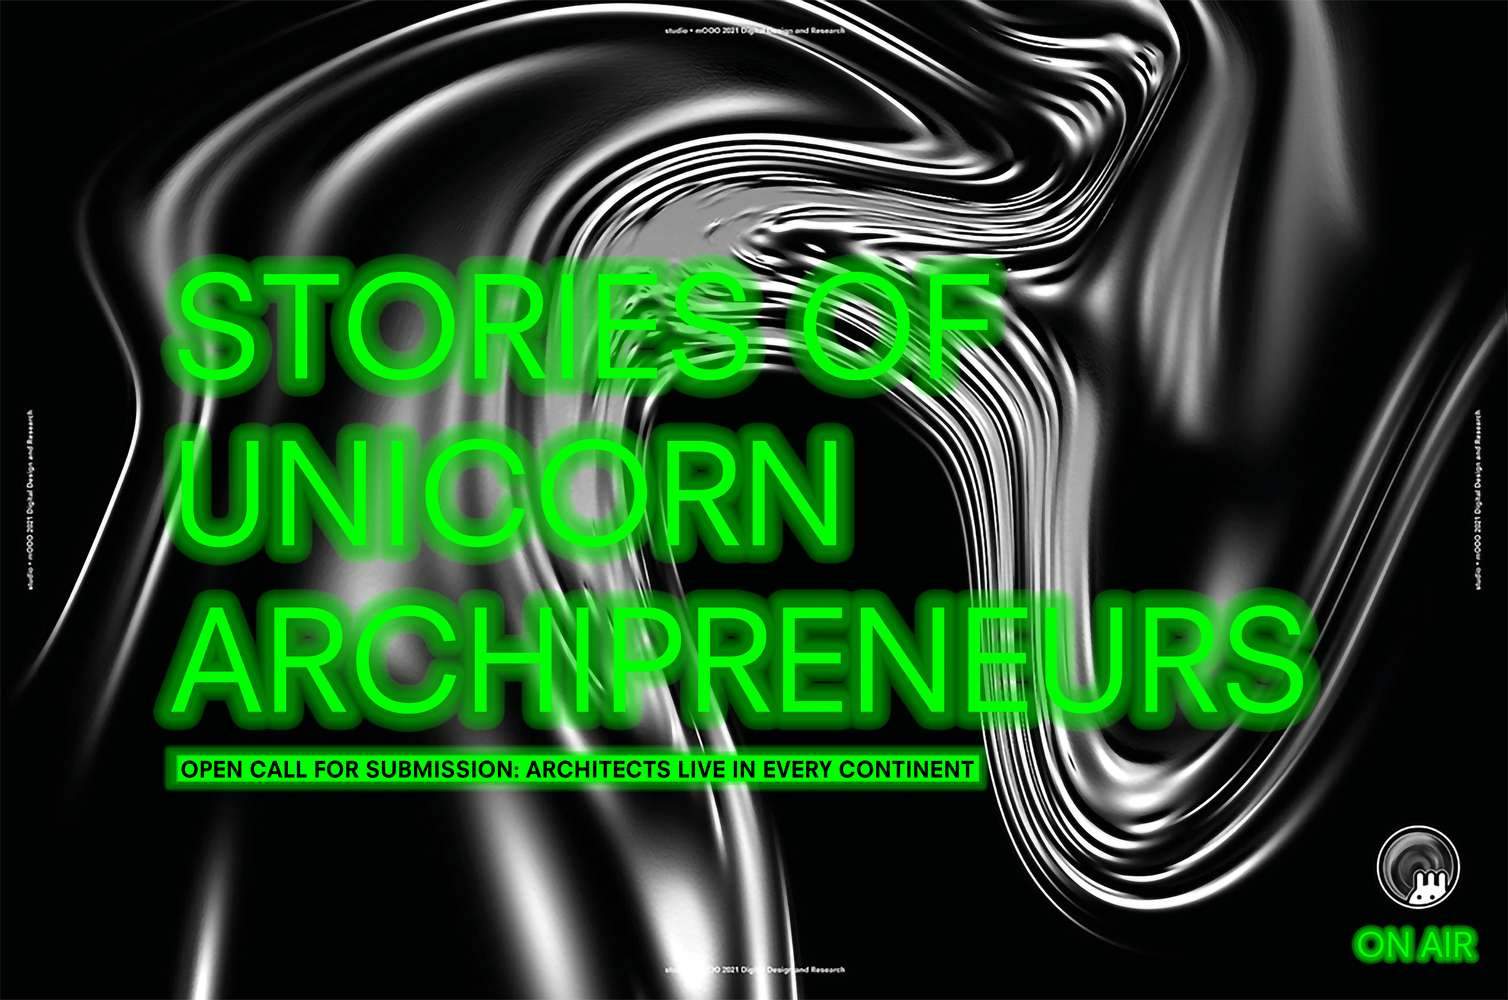 Open call for video submission – stories from unicorn archipreneurs